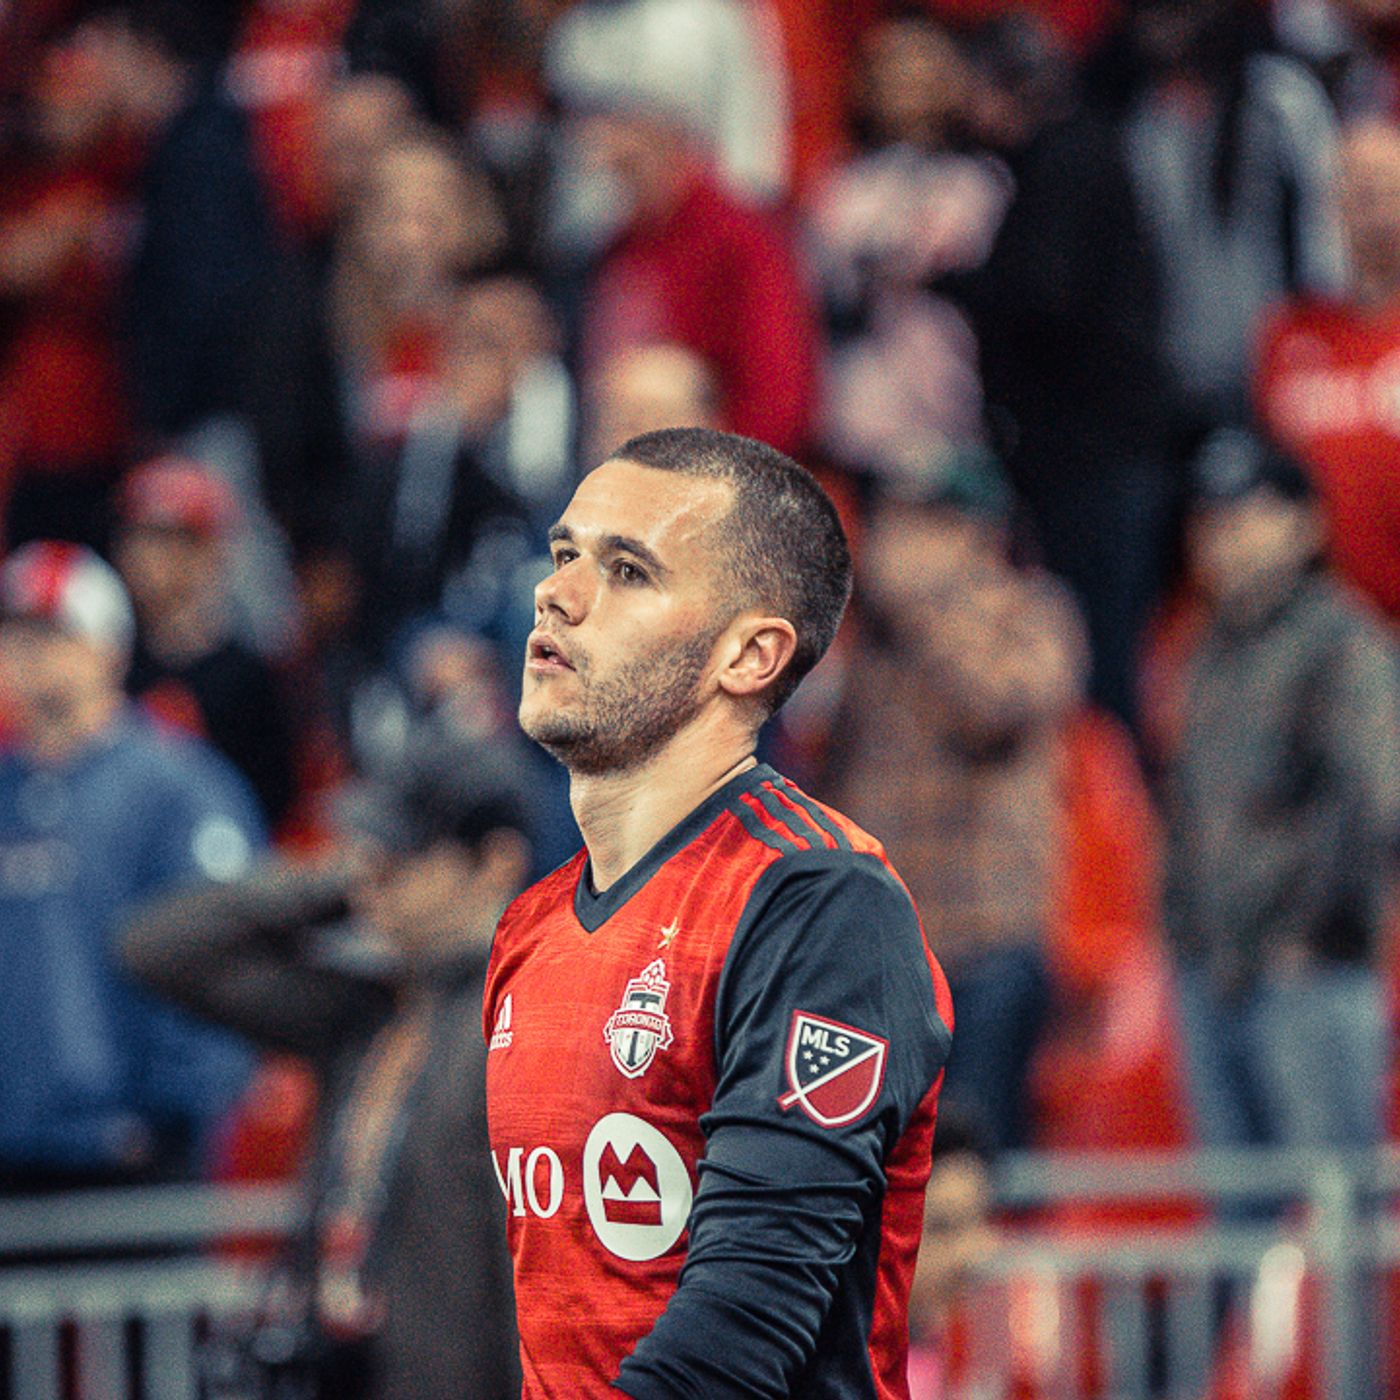 S1 Ep28: Footy Talks Podcast - Episode 17: How to fix a problem like Toronto FC